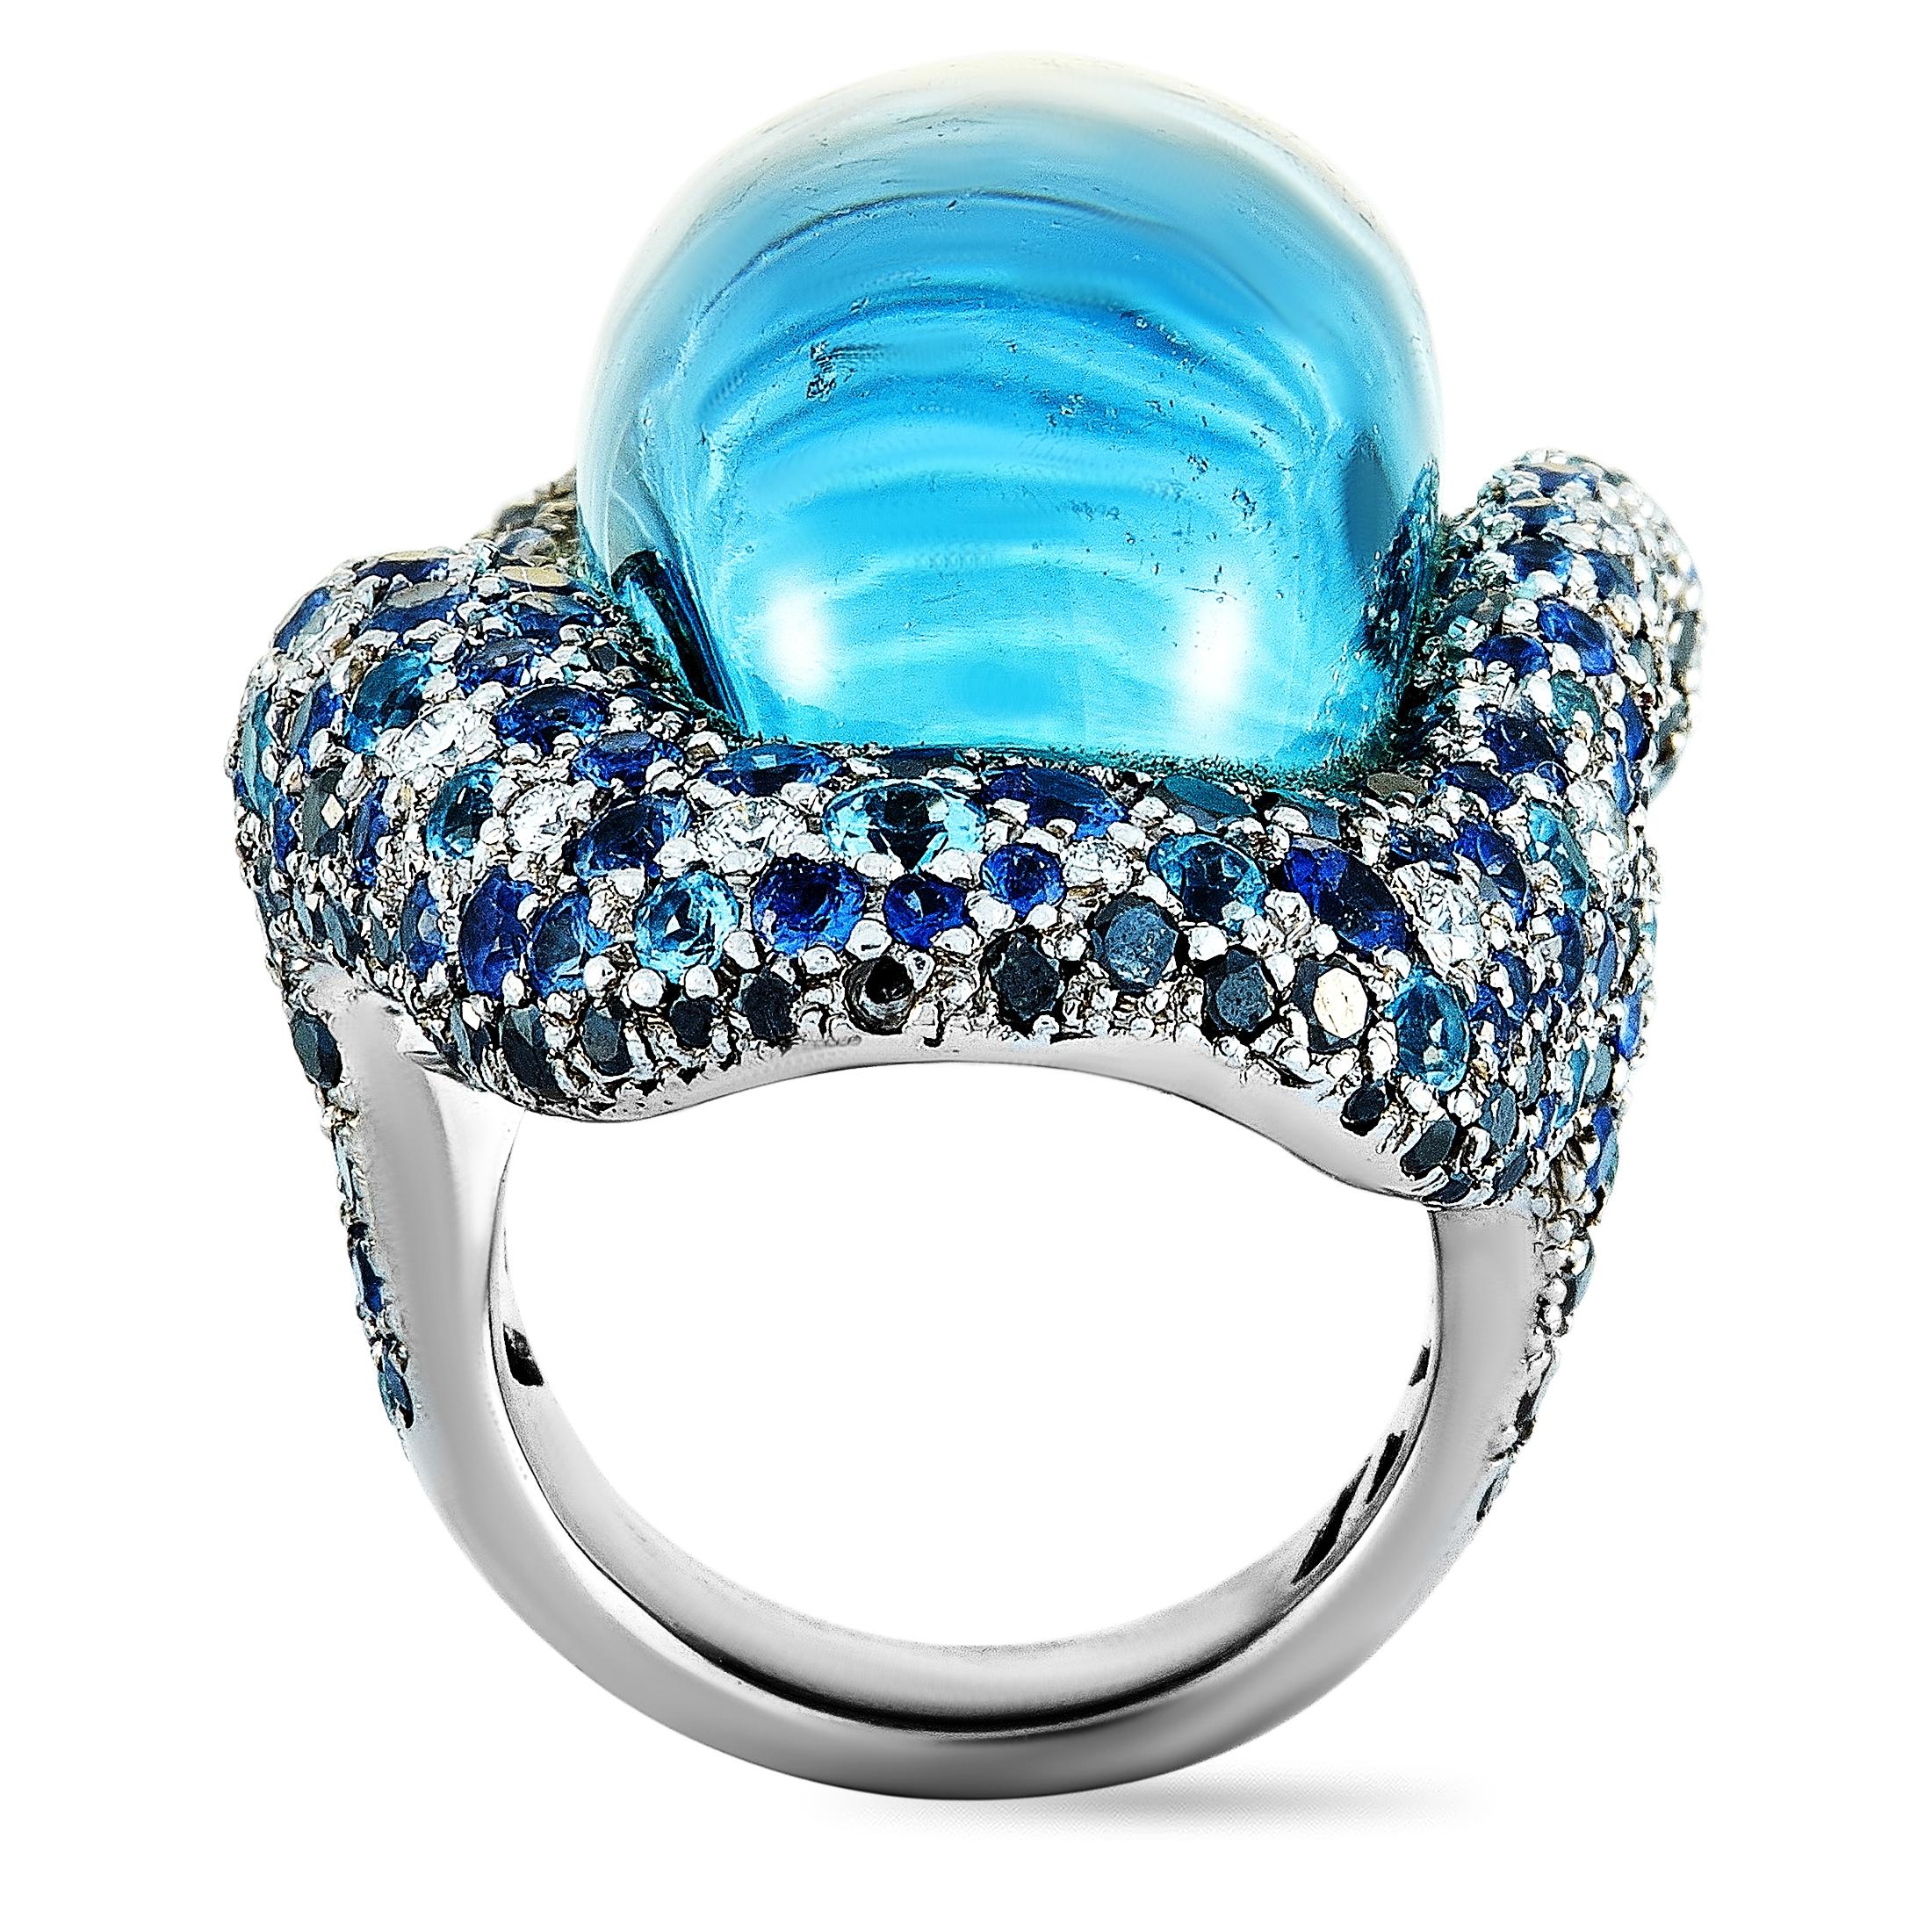 This Vasari ring is made of 18K white gold and weighs 41.5 grams. It boasts band thickness of 5 mm and top height of 14 mm, while top dimensions measure 26 by 40 mm. The ring is set with a topaz, a total of 3.00 carats of sapphires, and with black